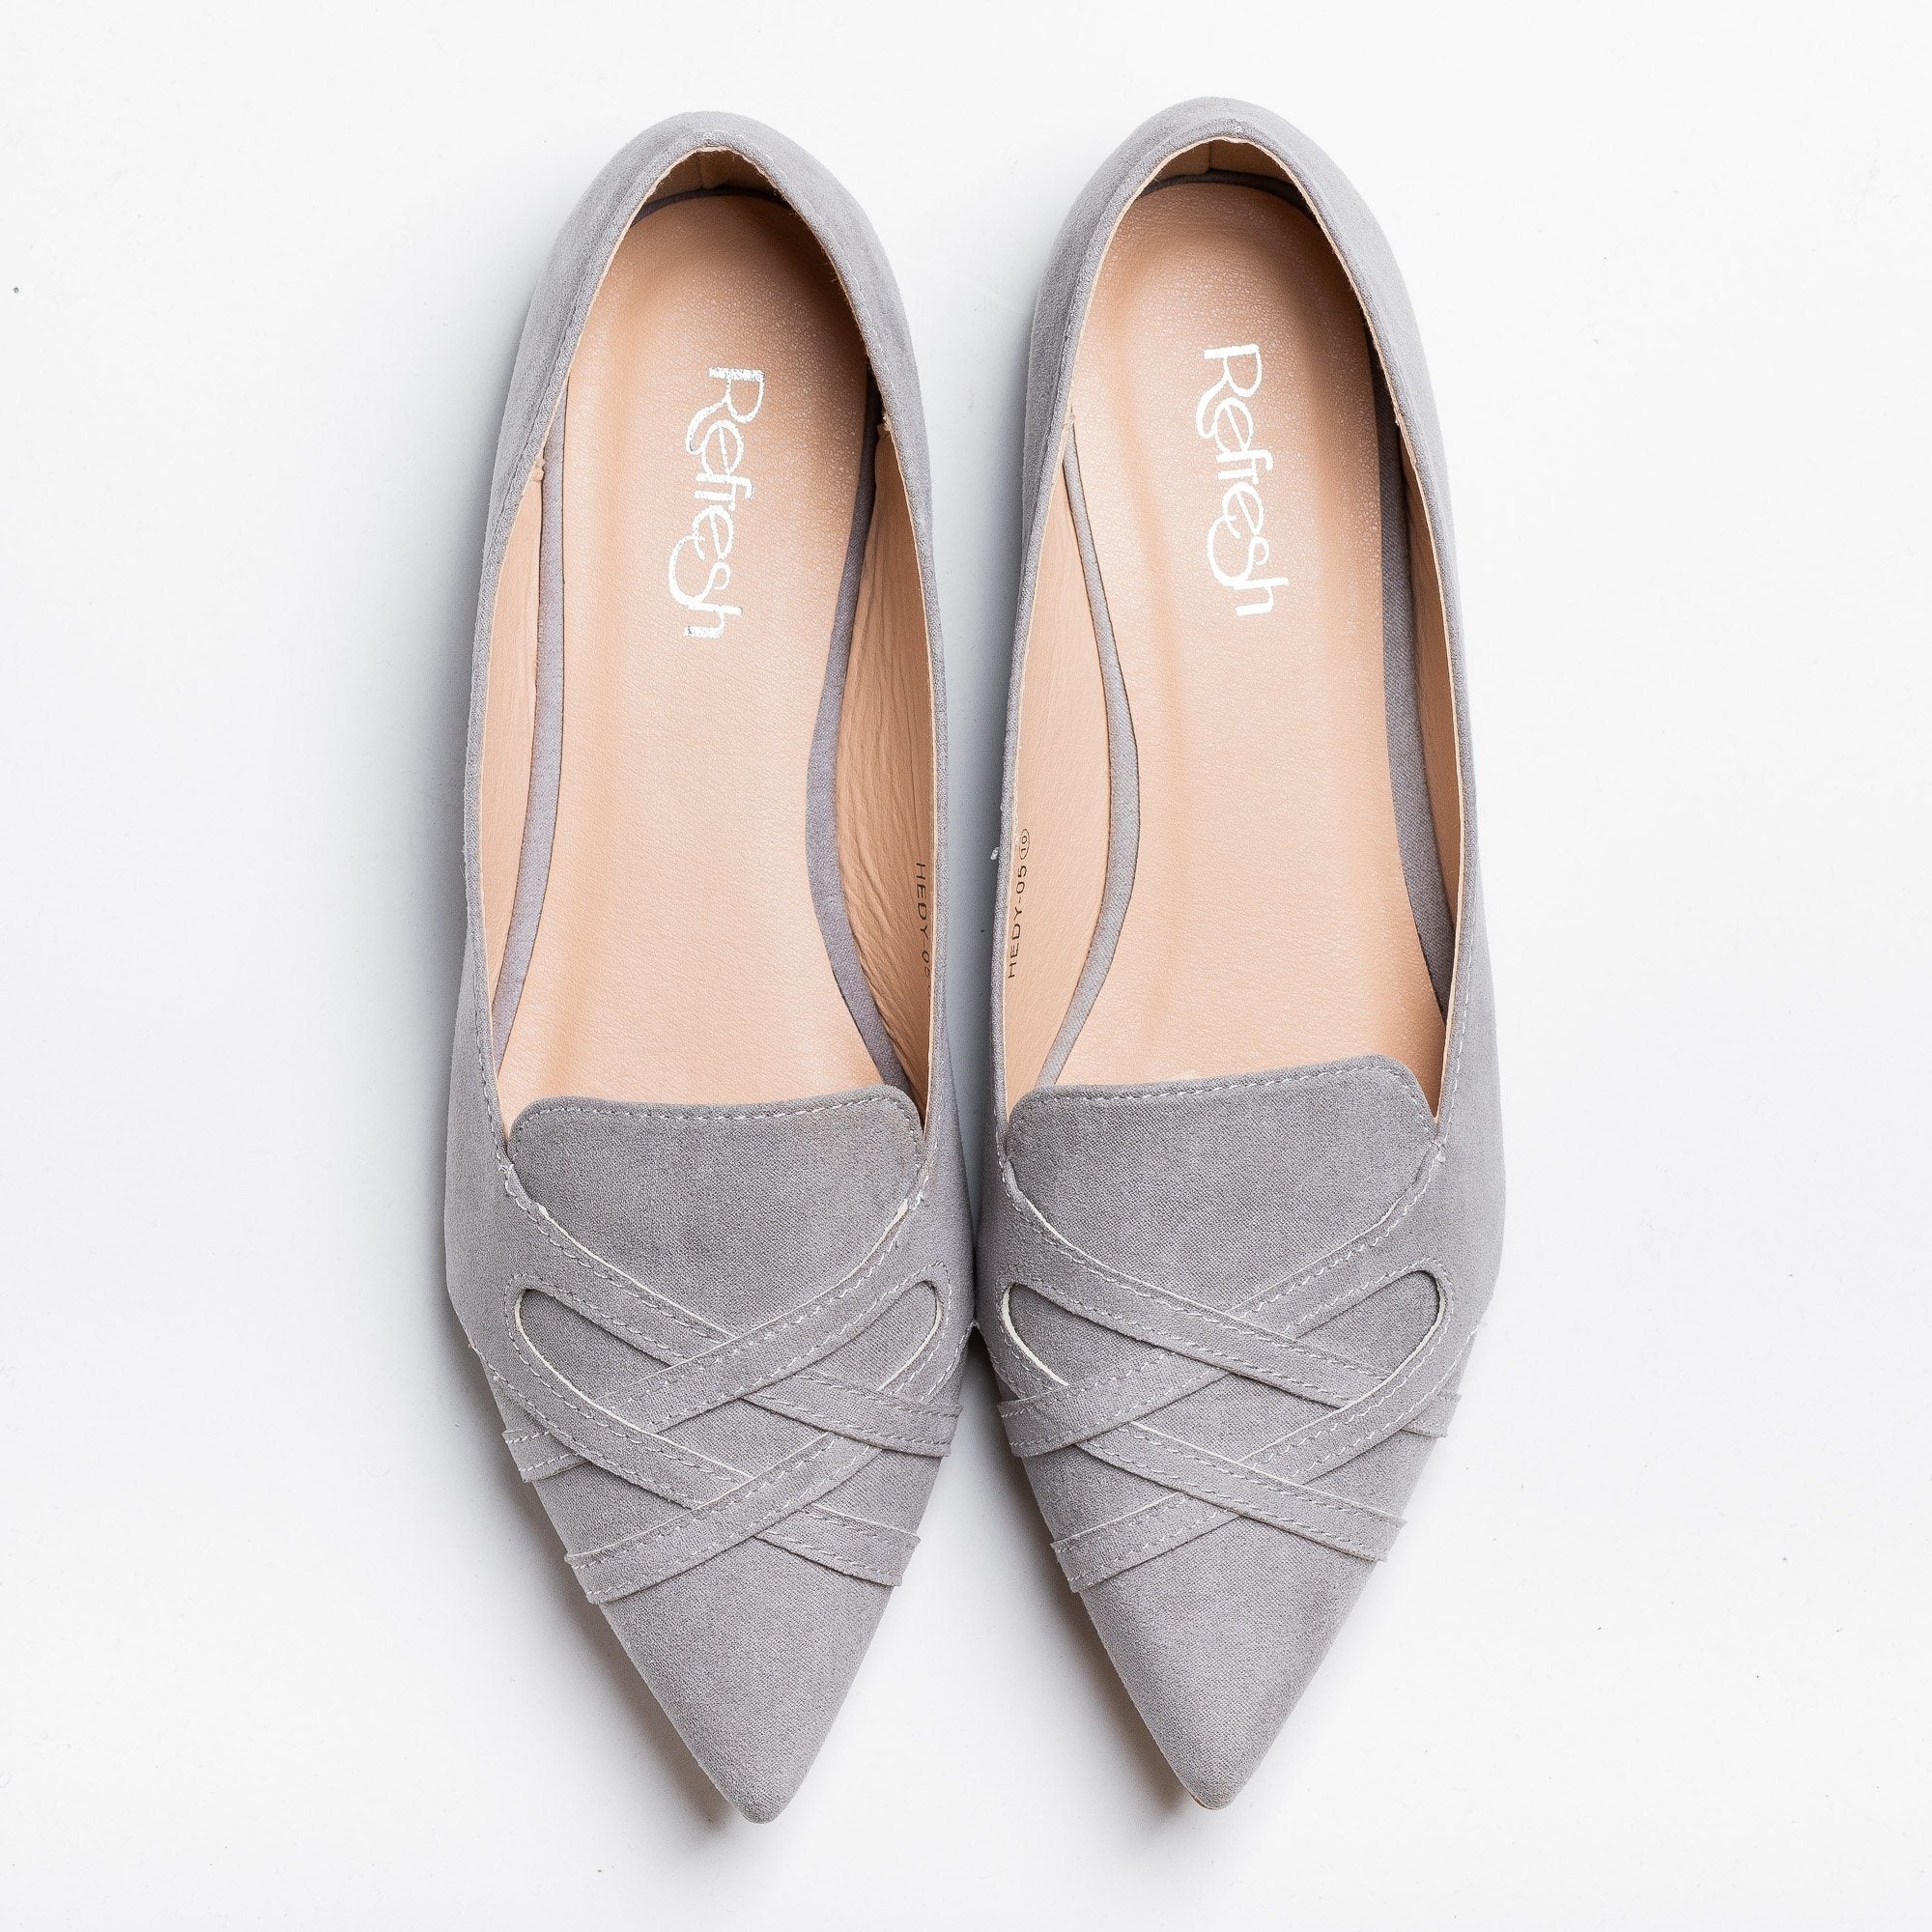 grey pointed flats